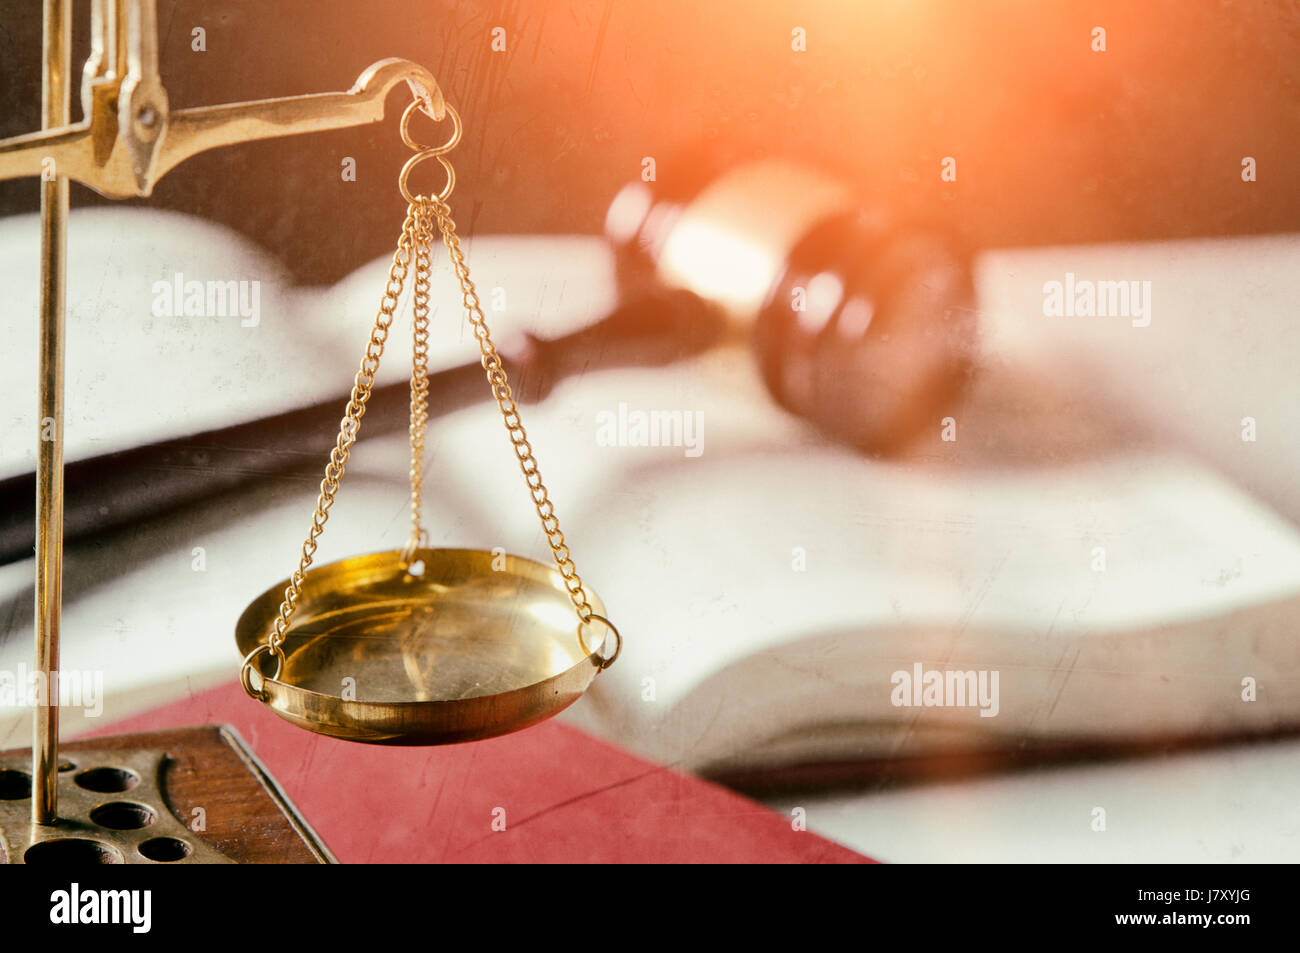 Weight scales in court room library. Law old retro style photo Stock Photo